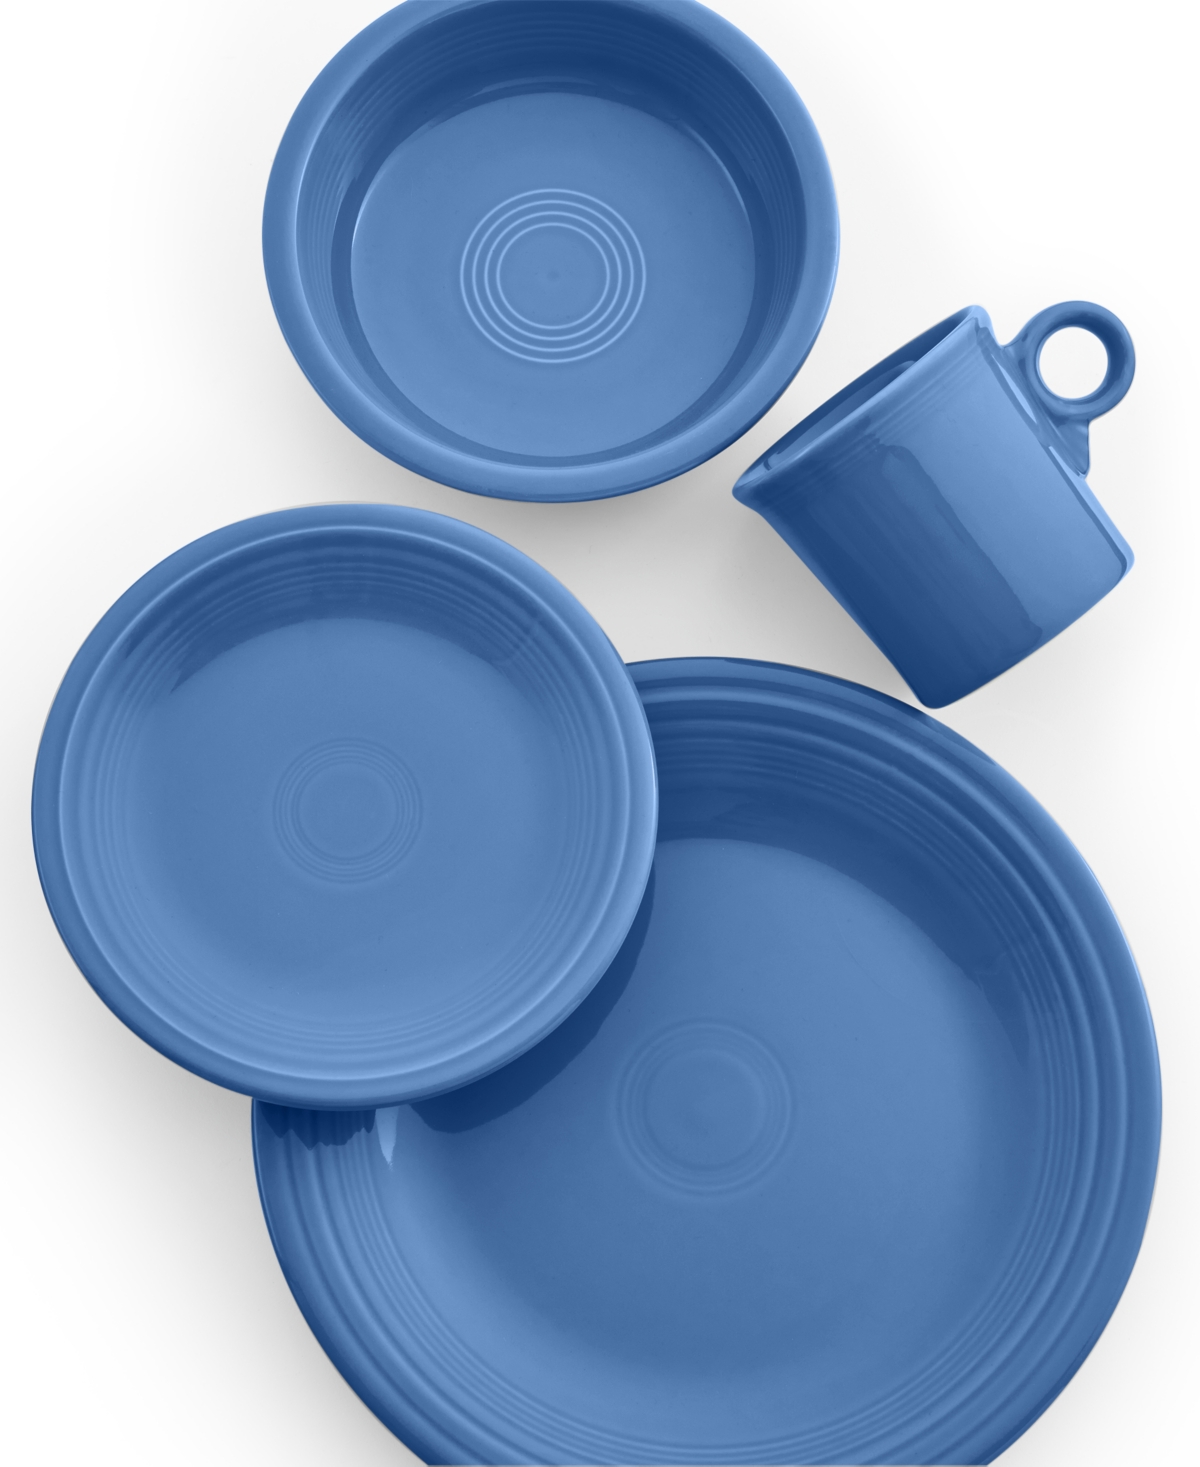 Fiesta 4-piece Place Setting In Lapis